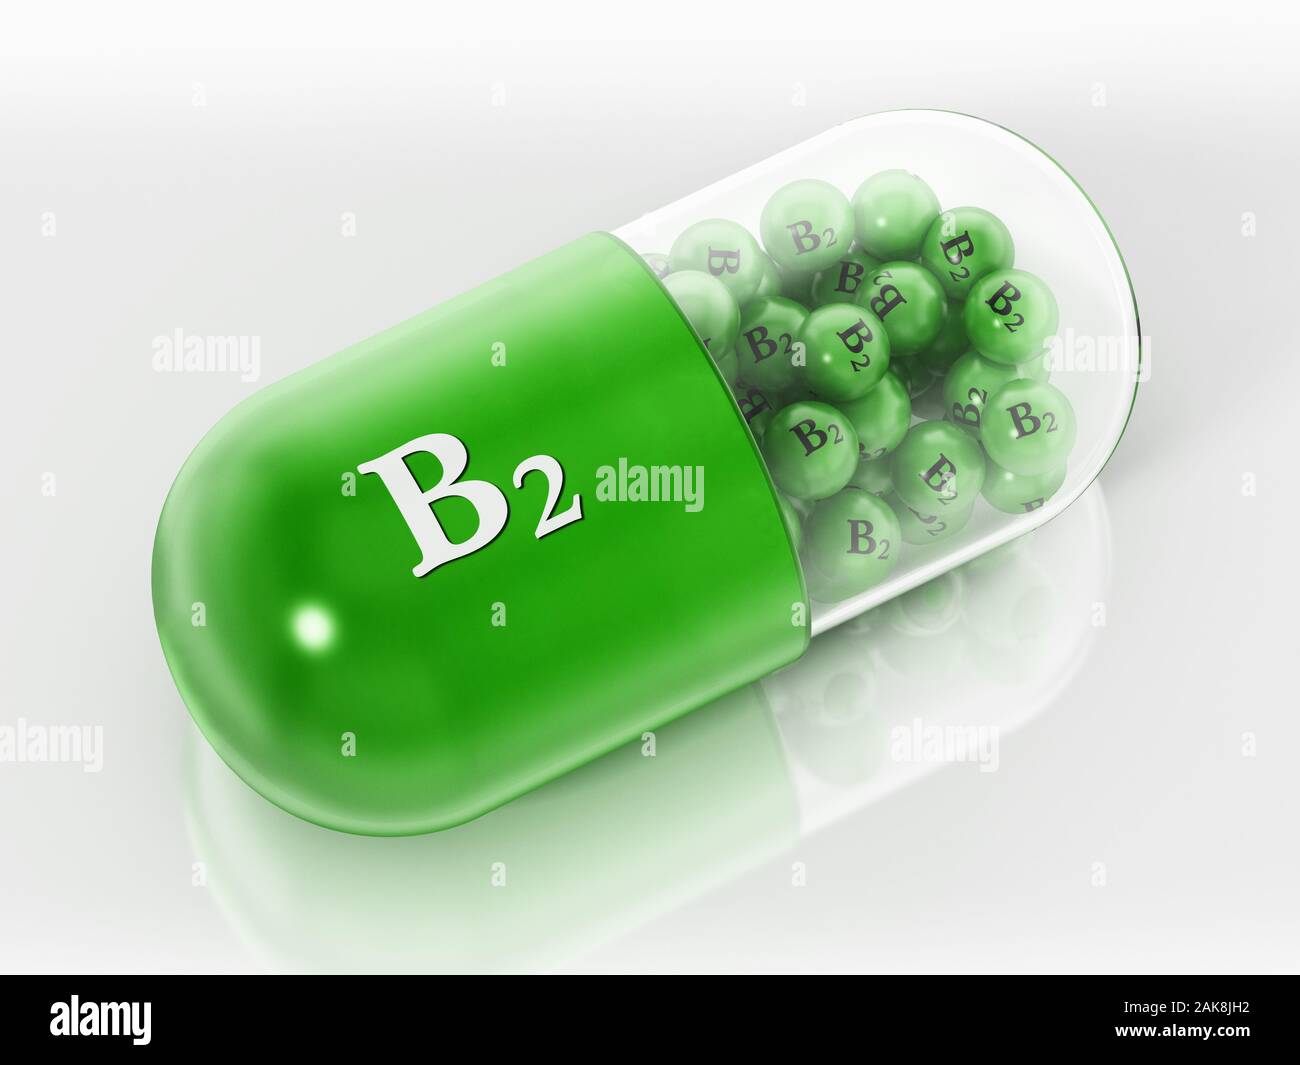 Vitamin B2 pill with small spheres isolated on white background. 3D illustration. Stock Photo